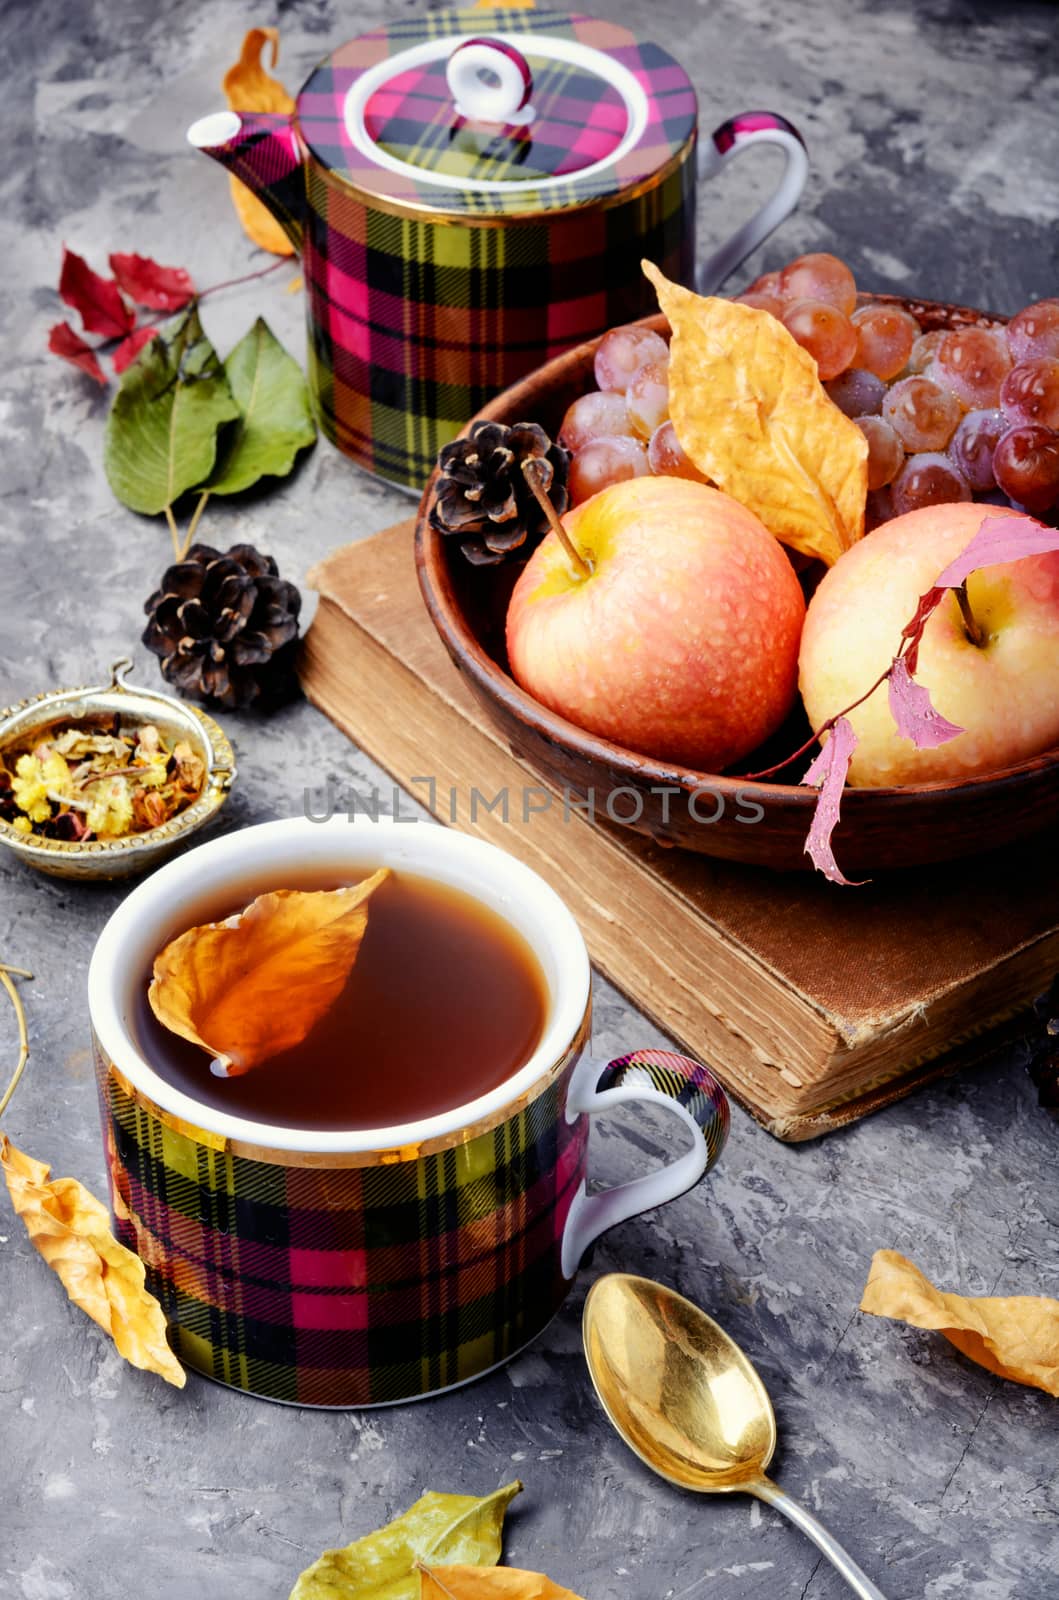 Cup with tea on an autumn background of fallen leaves, apples and grapes.Autumn still life